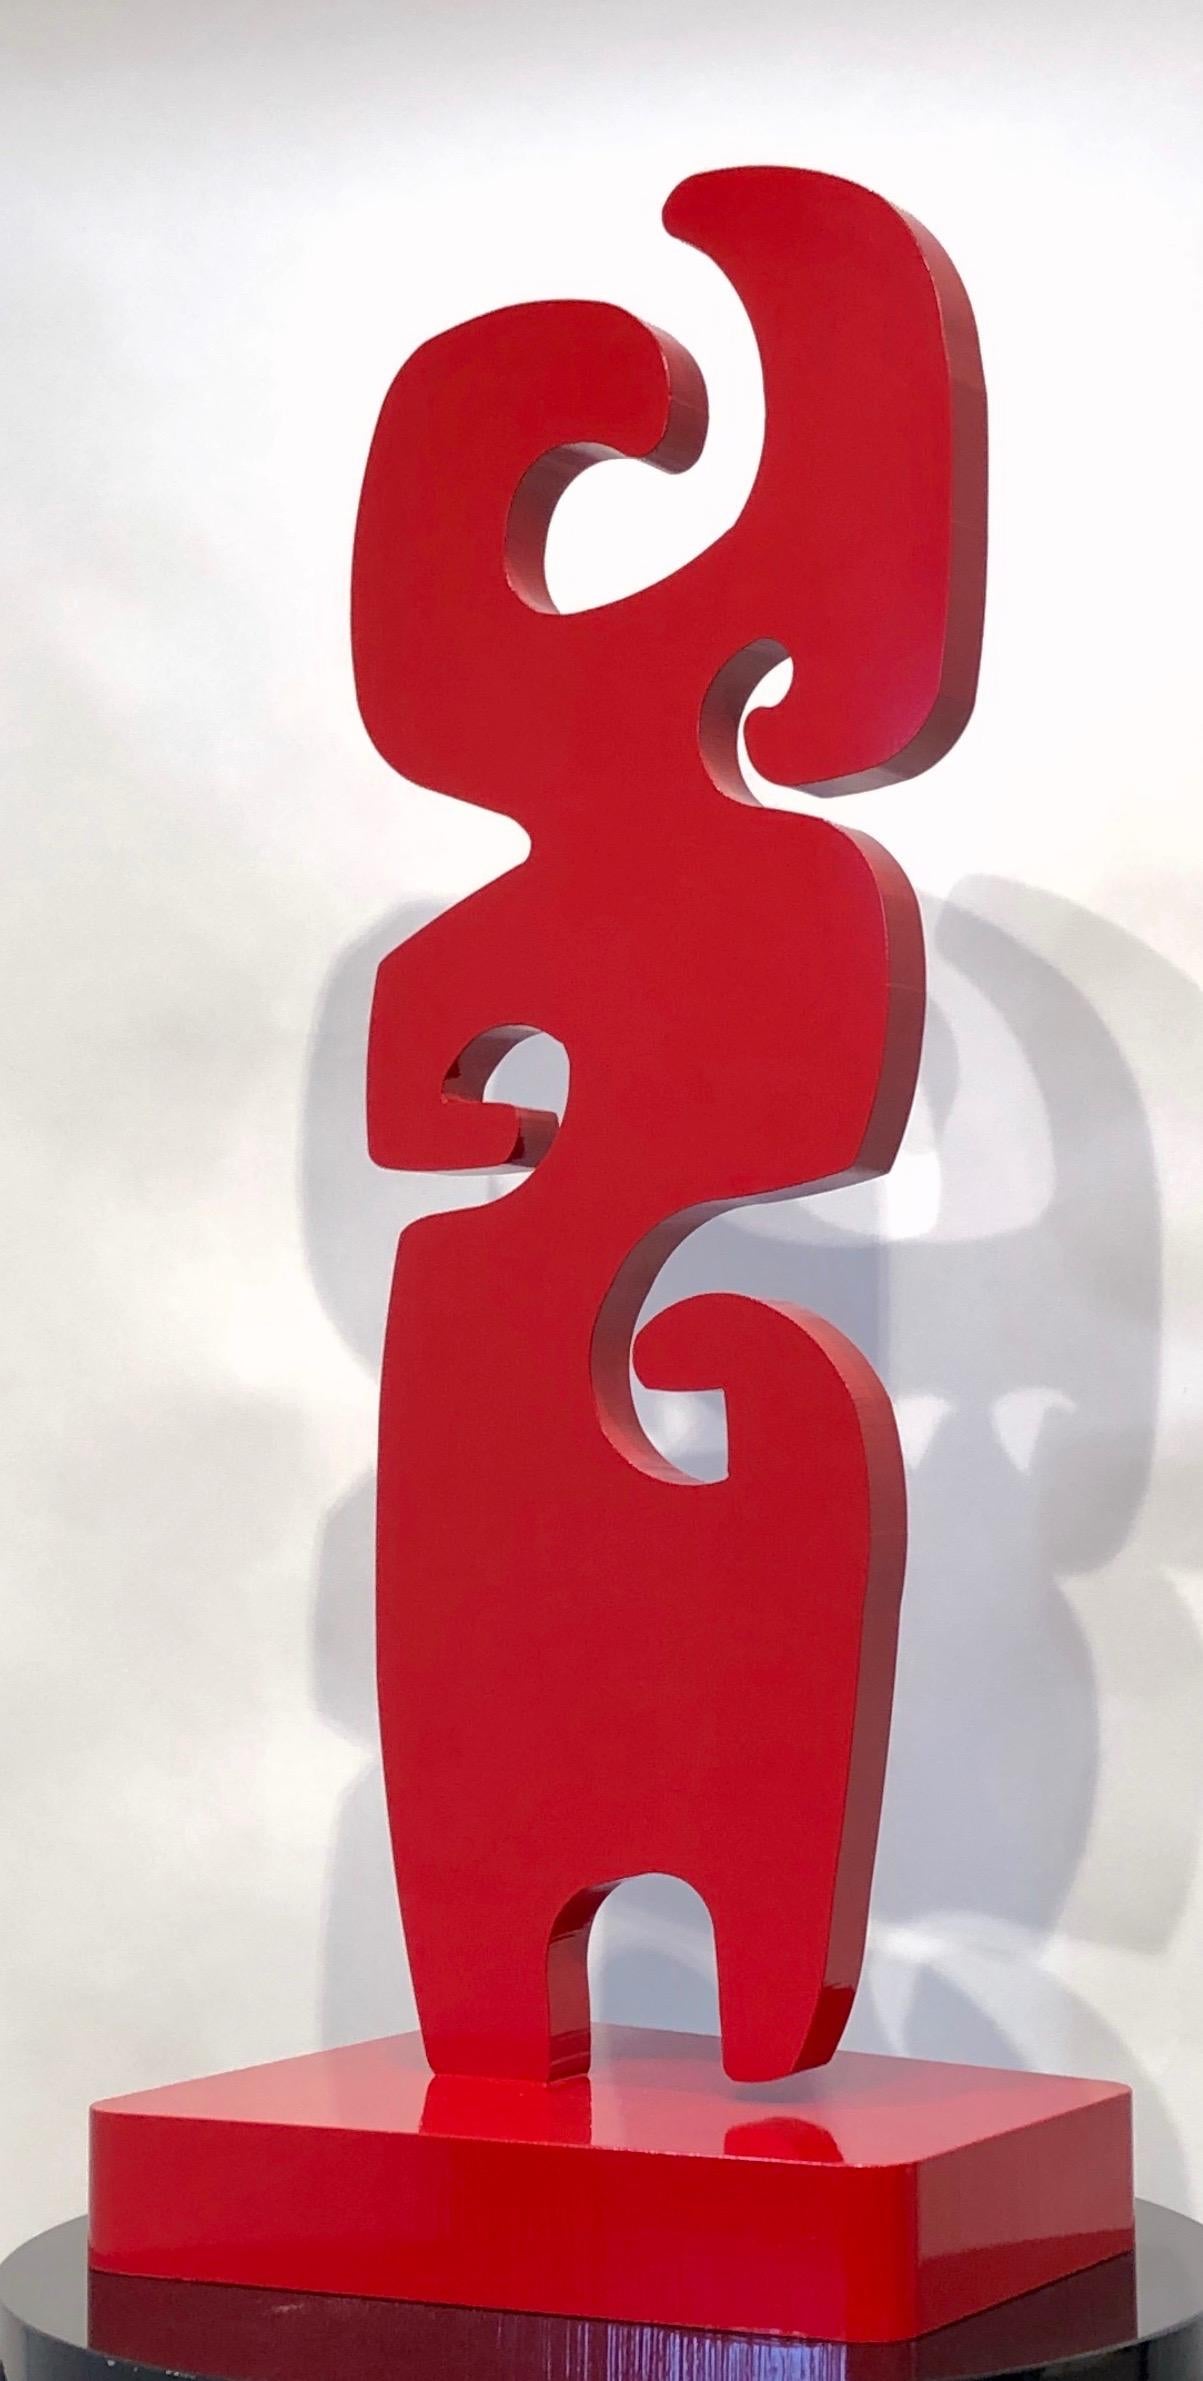 Grandmother, Melanie Yazzie aluminum sculpture powder coat finish red  Navajo

*This sculpture is available for order. Contact the gallery for available colors and timeframe for delivery. Covid-19 may affect the schedules.

As a printmaker, painter,